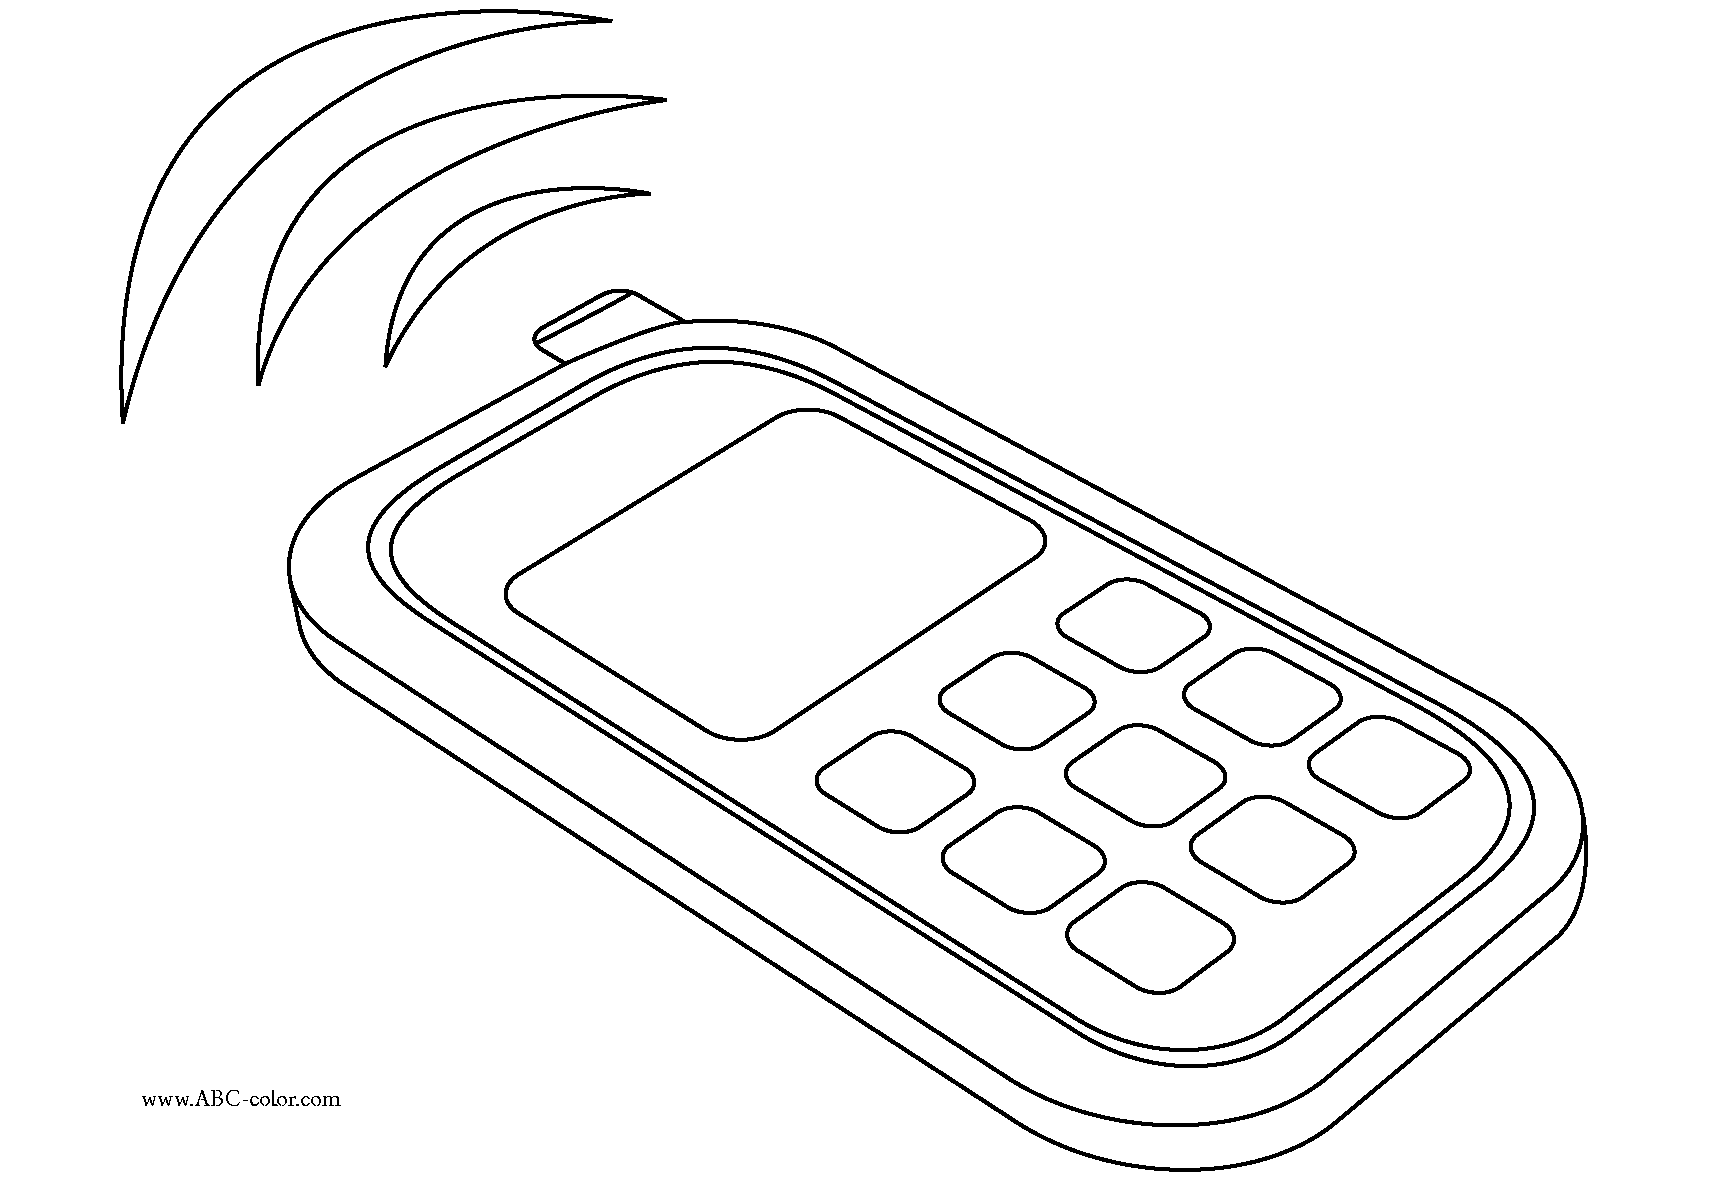 colouring in phone - Clip Art Library